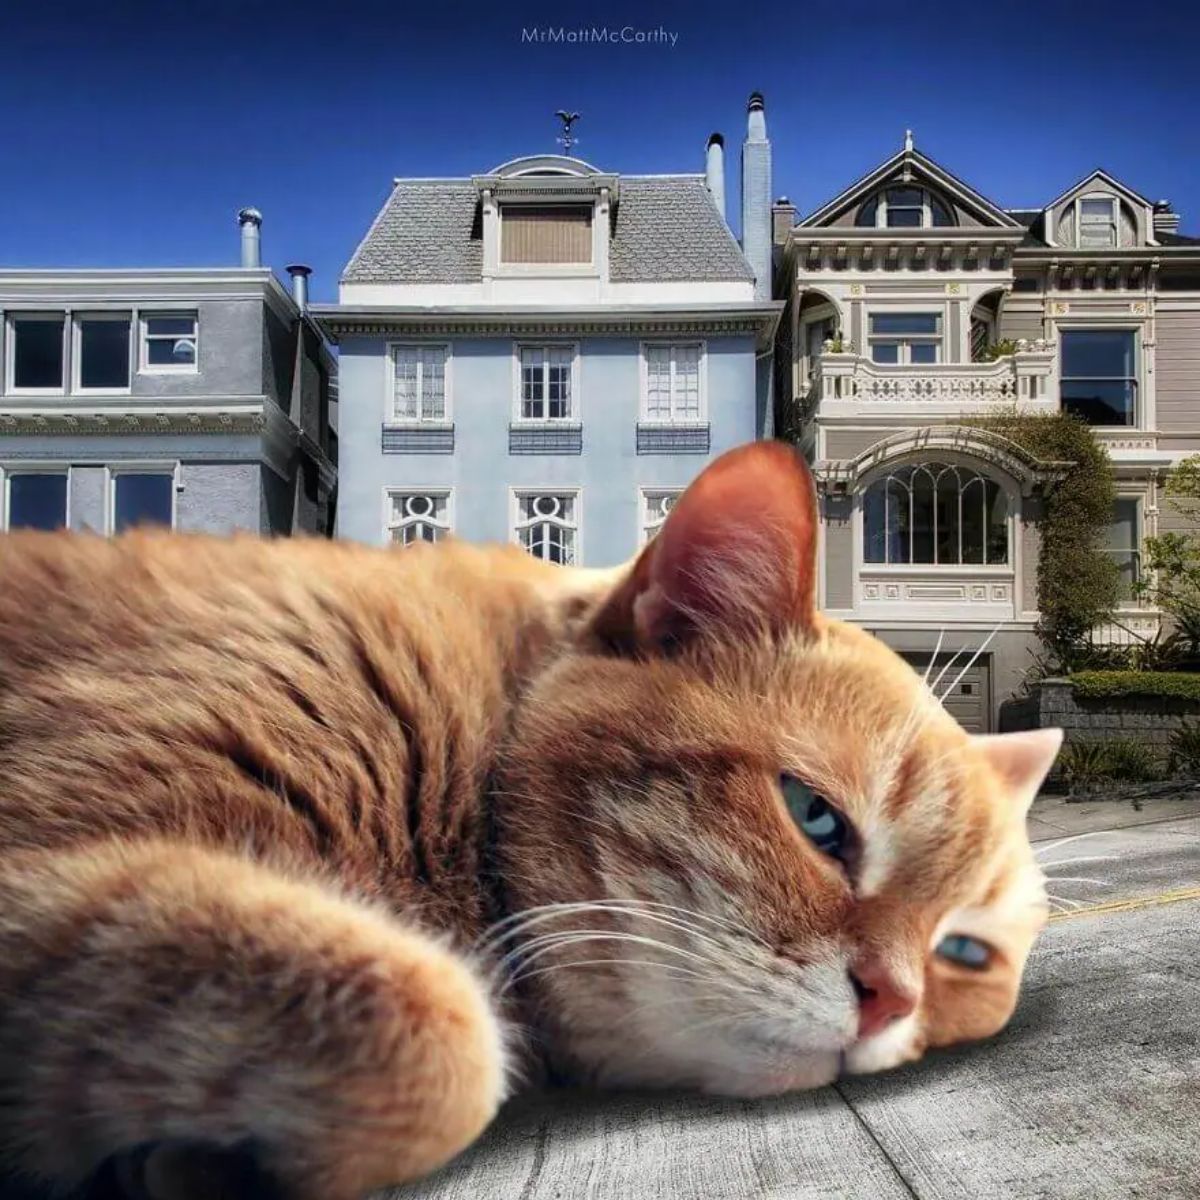 large photoshopped orange and white cat sleeping on a road in front of some houses